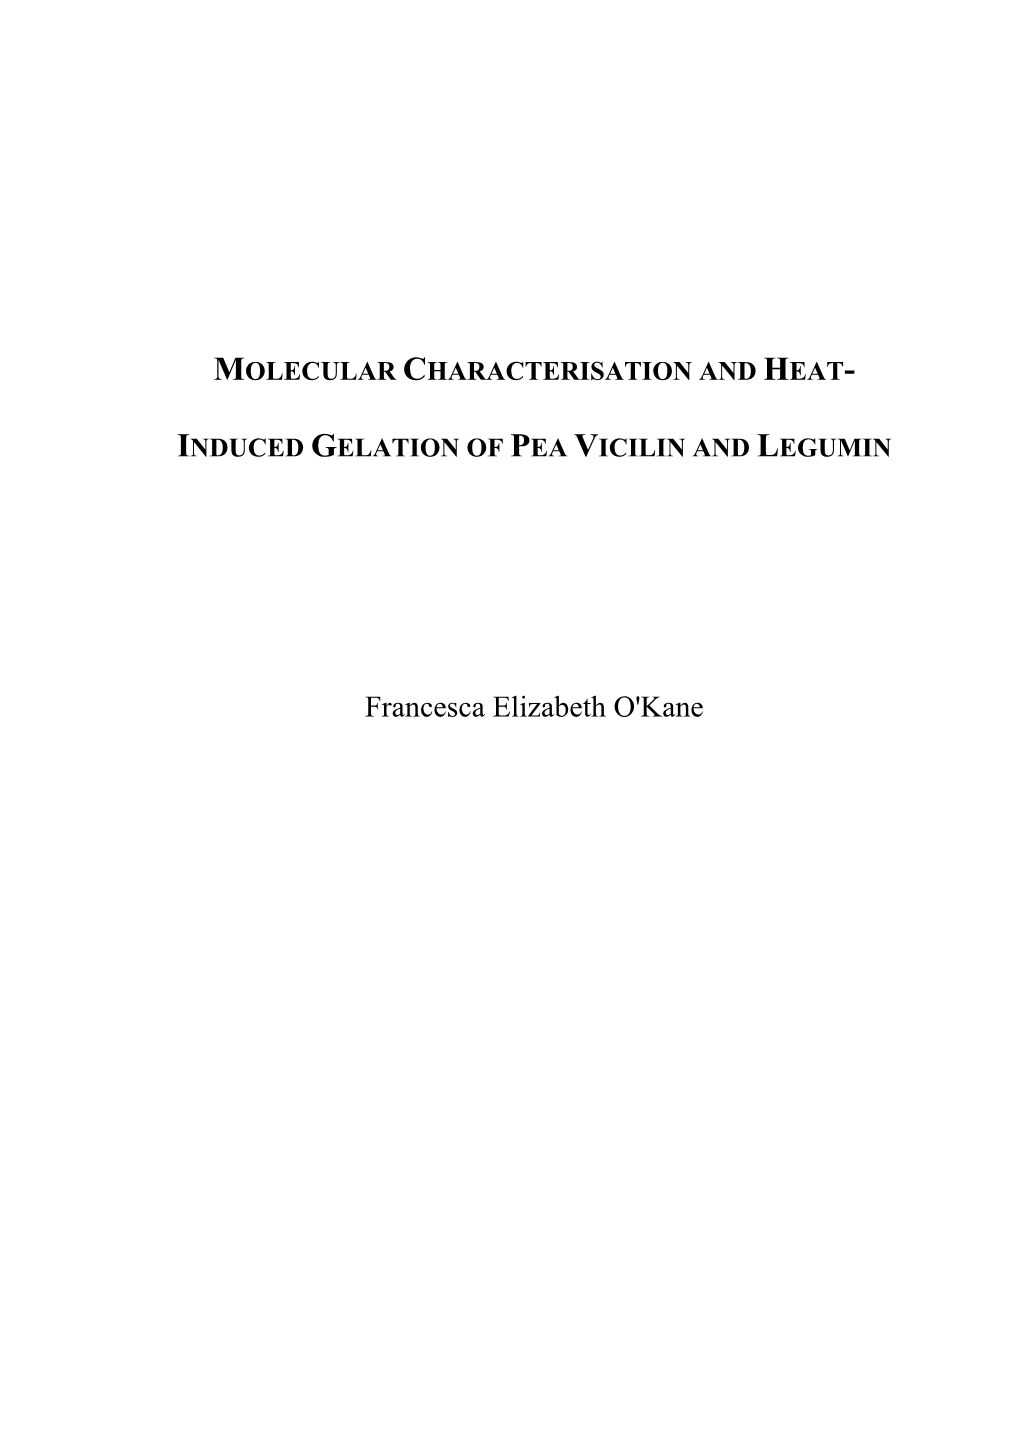 Induced Gelation of Pea Vicilin and Legumin